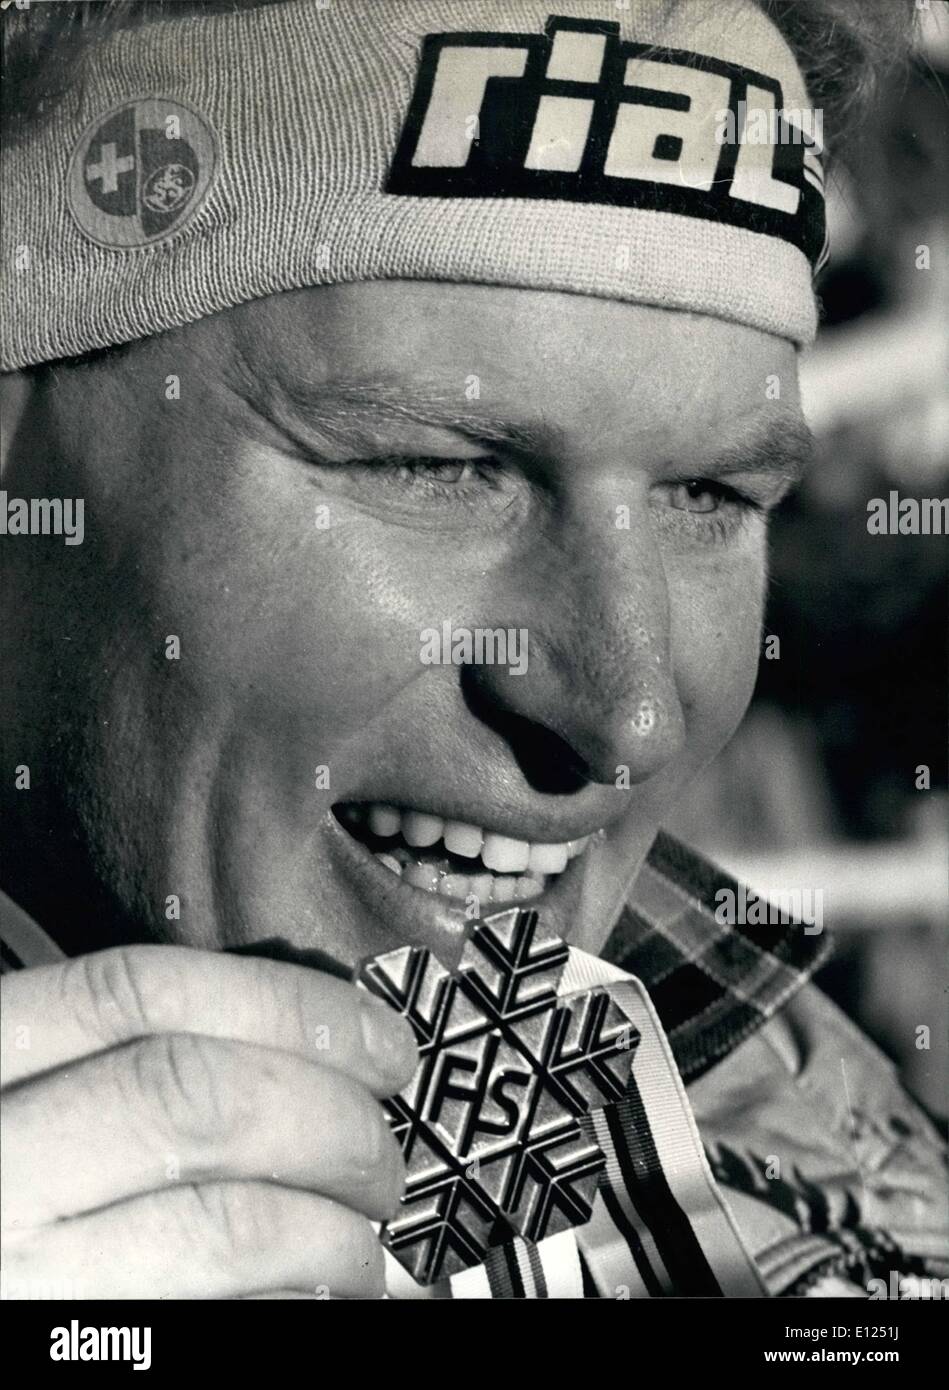 Jan. 01, 1987 - Gold for Peter Mueller - A Smiling Peter Muller Presents his gold medal after winning the men's downhill competition at the Skiing World Championships in Crans- Montana, Jan 31. Stock Photo